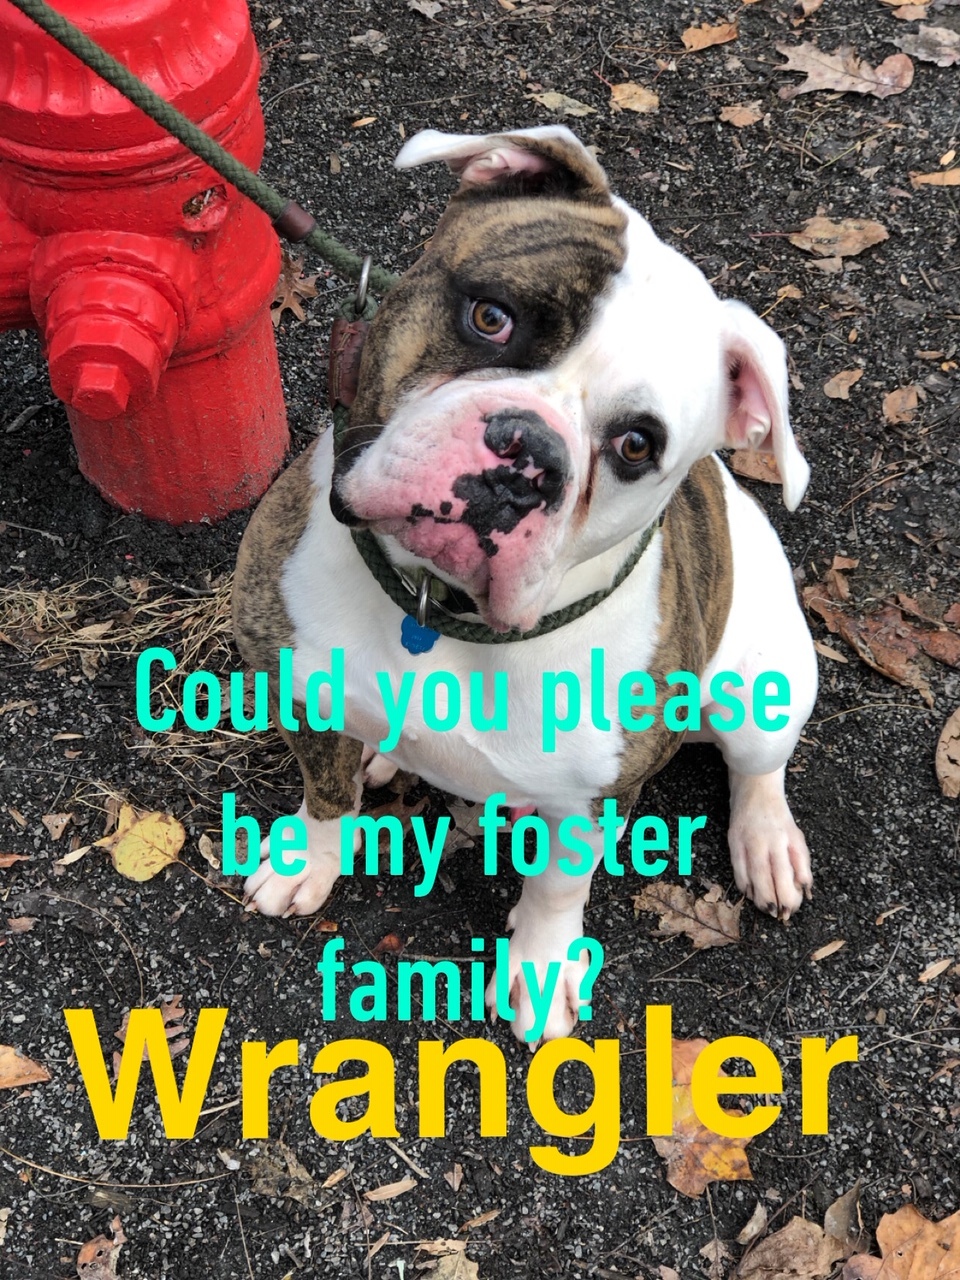 Wrangler Now In Foster Home detail page